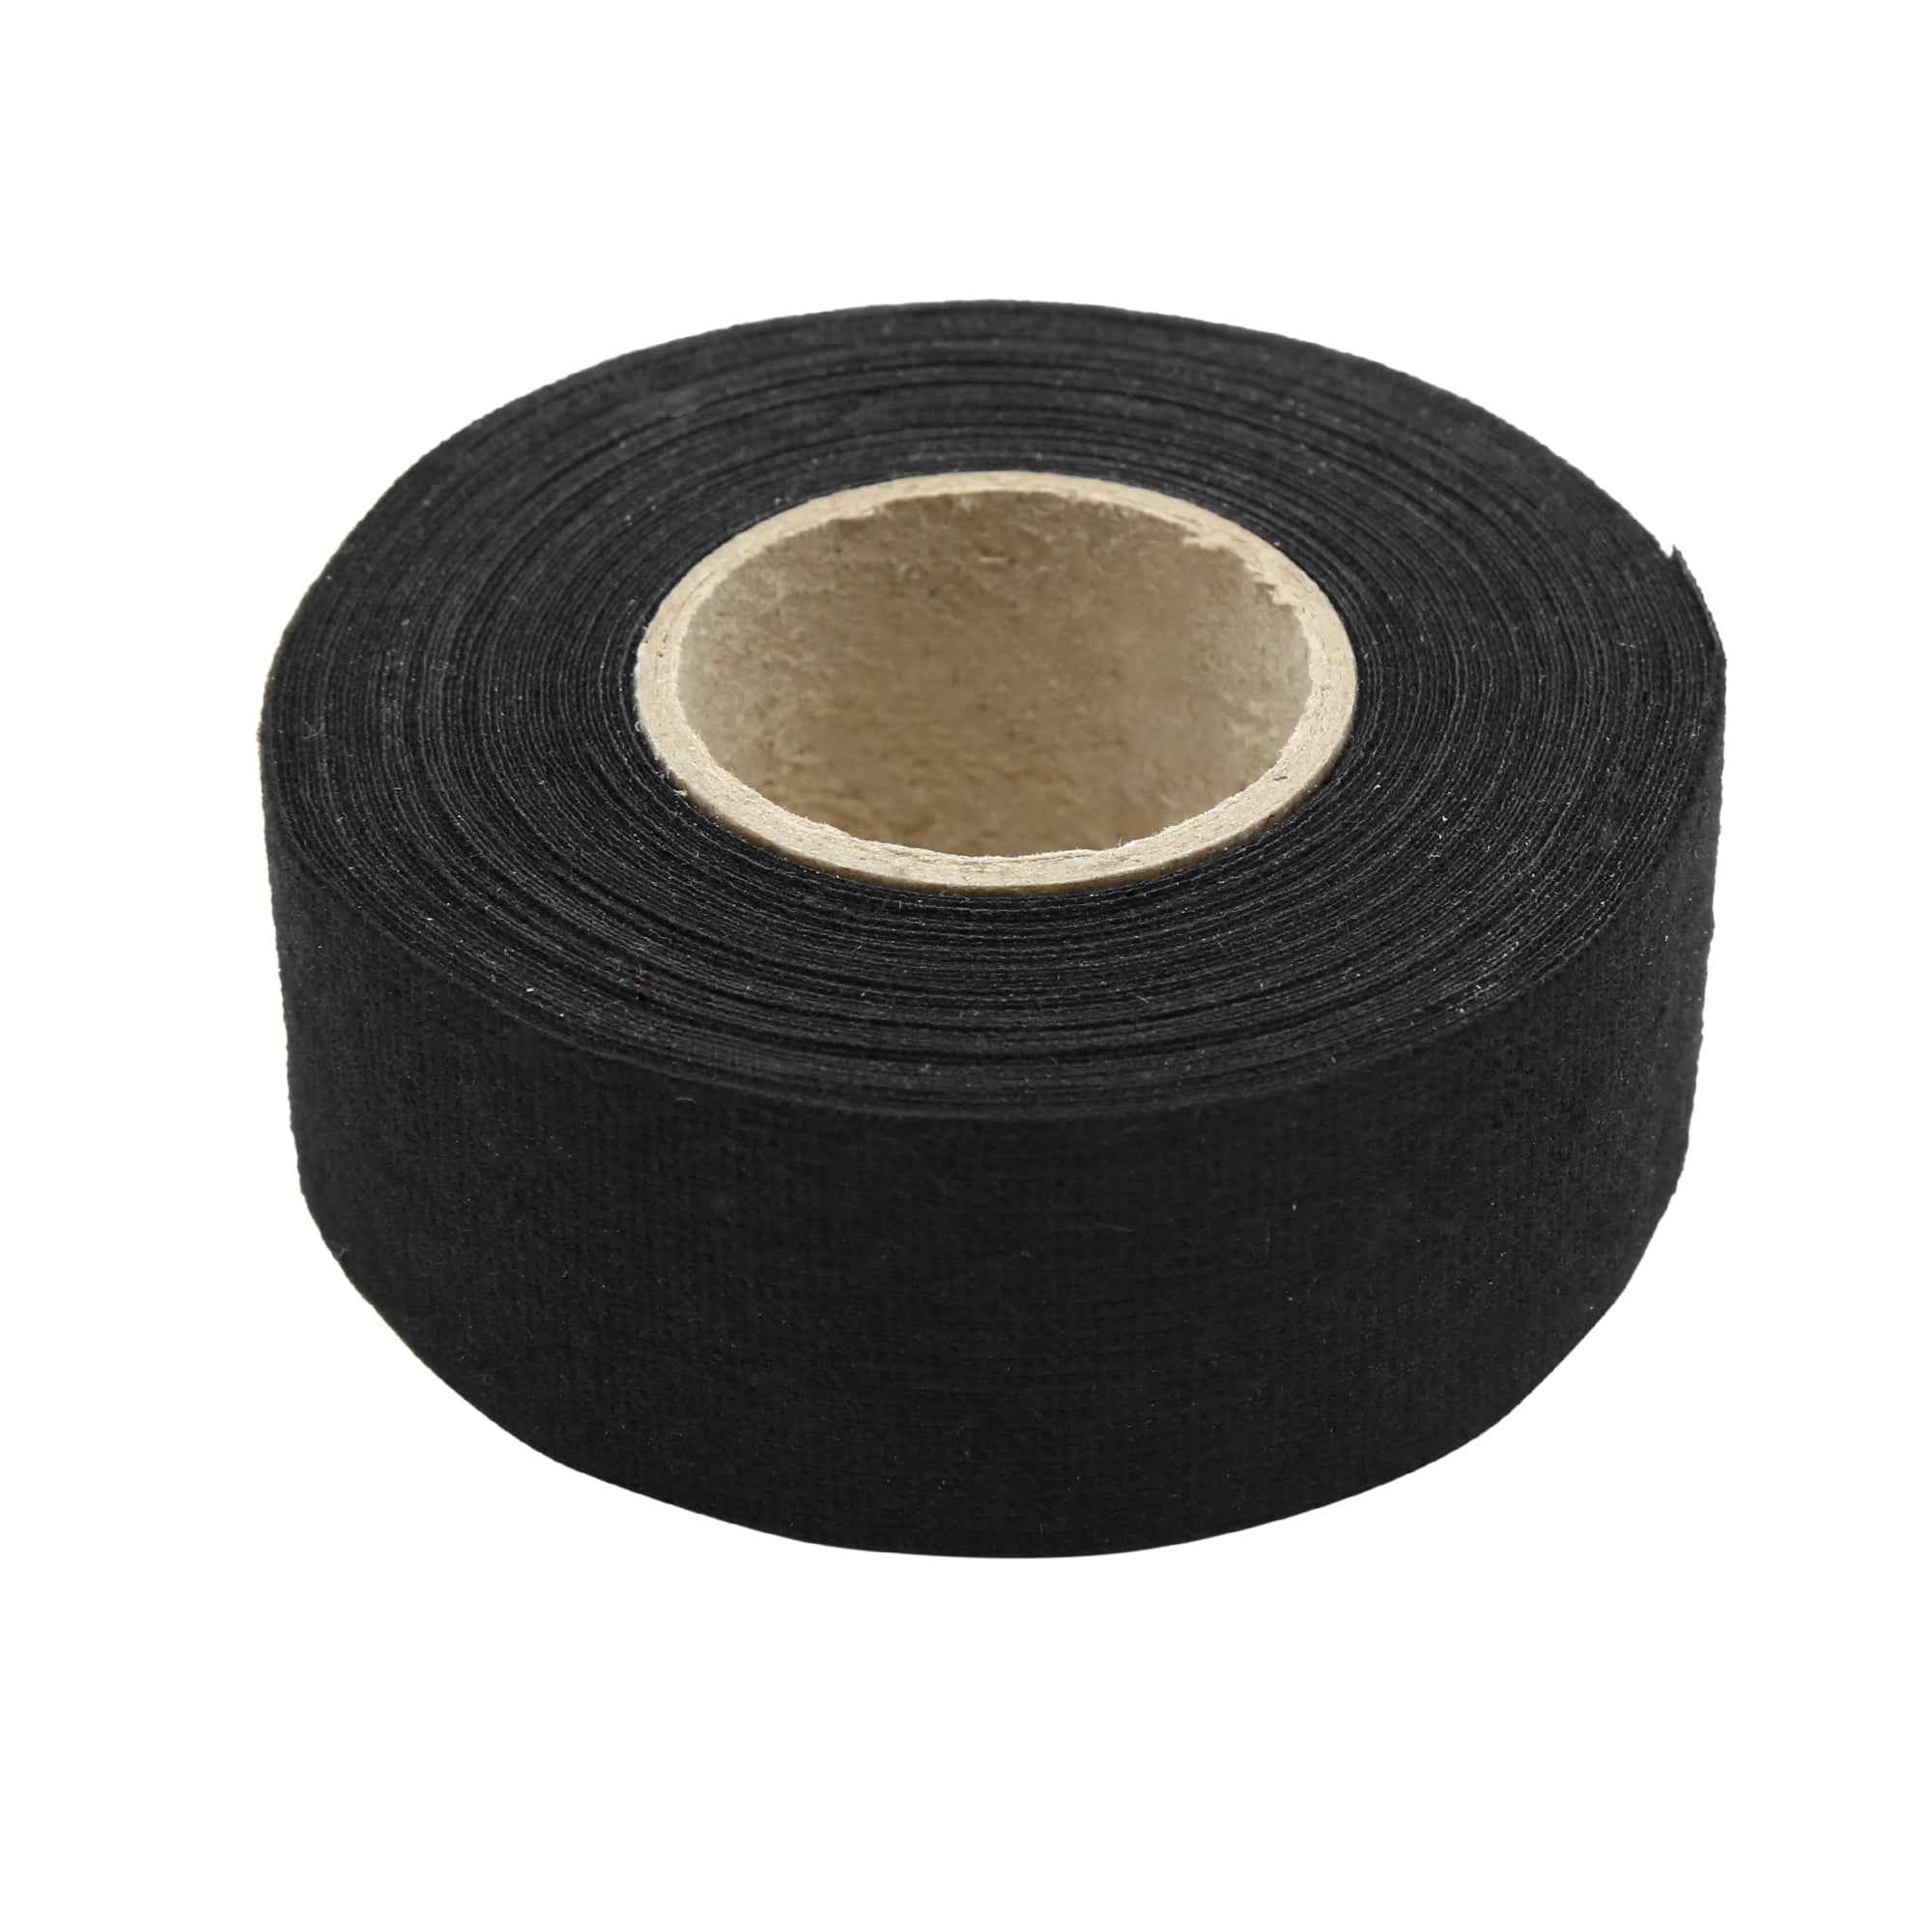 Black 32mm*12m Adhesive Cloth Fabric Tape Cable Looms Wiring Harness X 